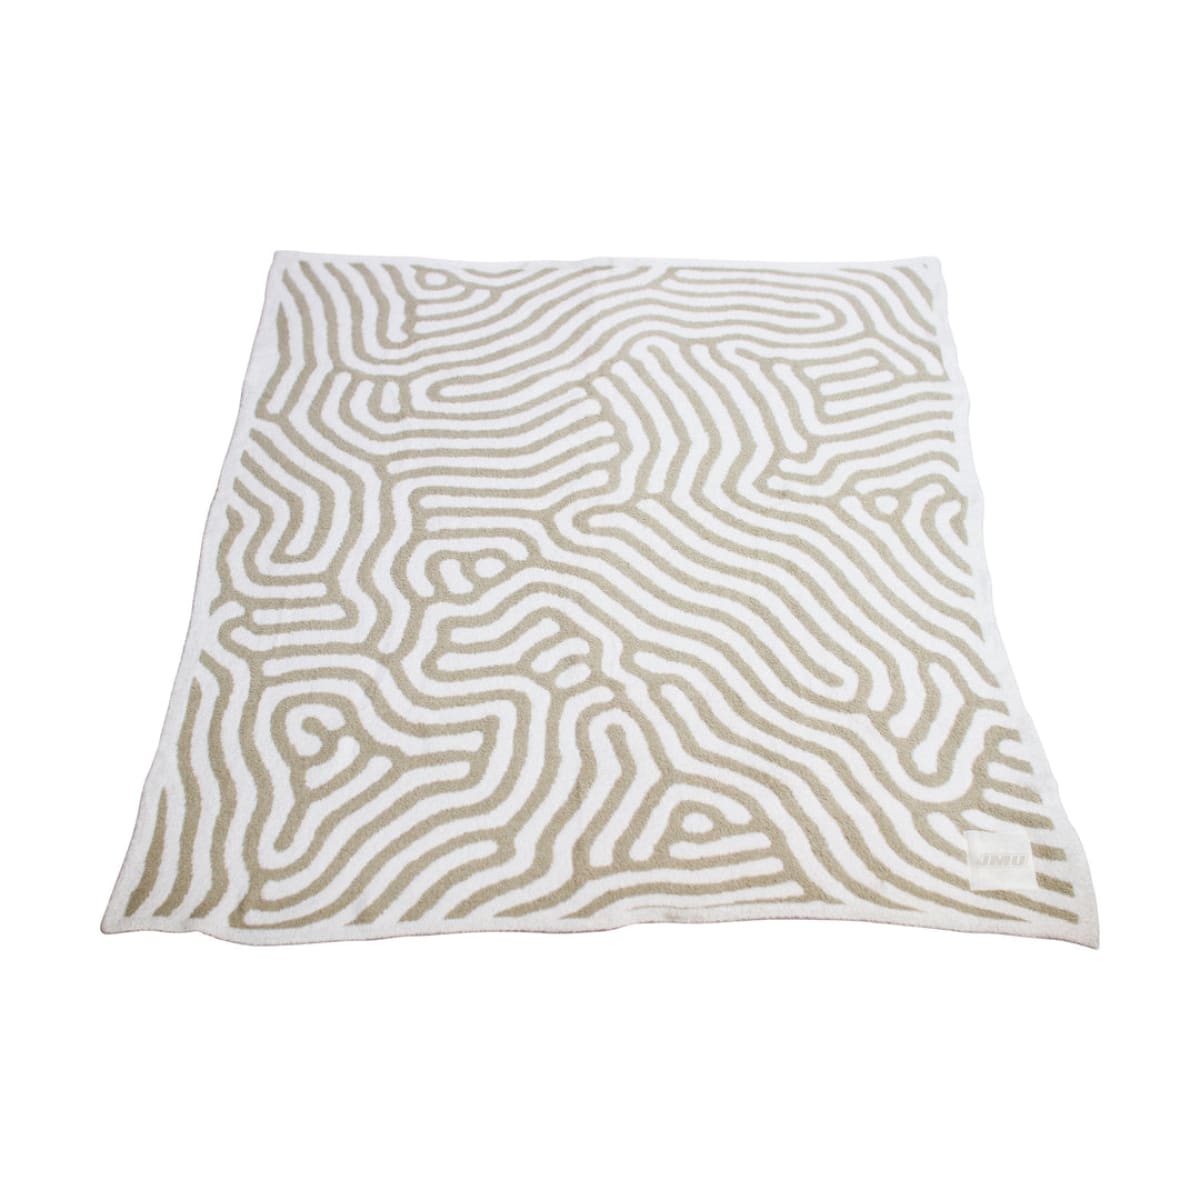 JMU Luxe Throw by Barefoot Dreams - Throw